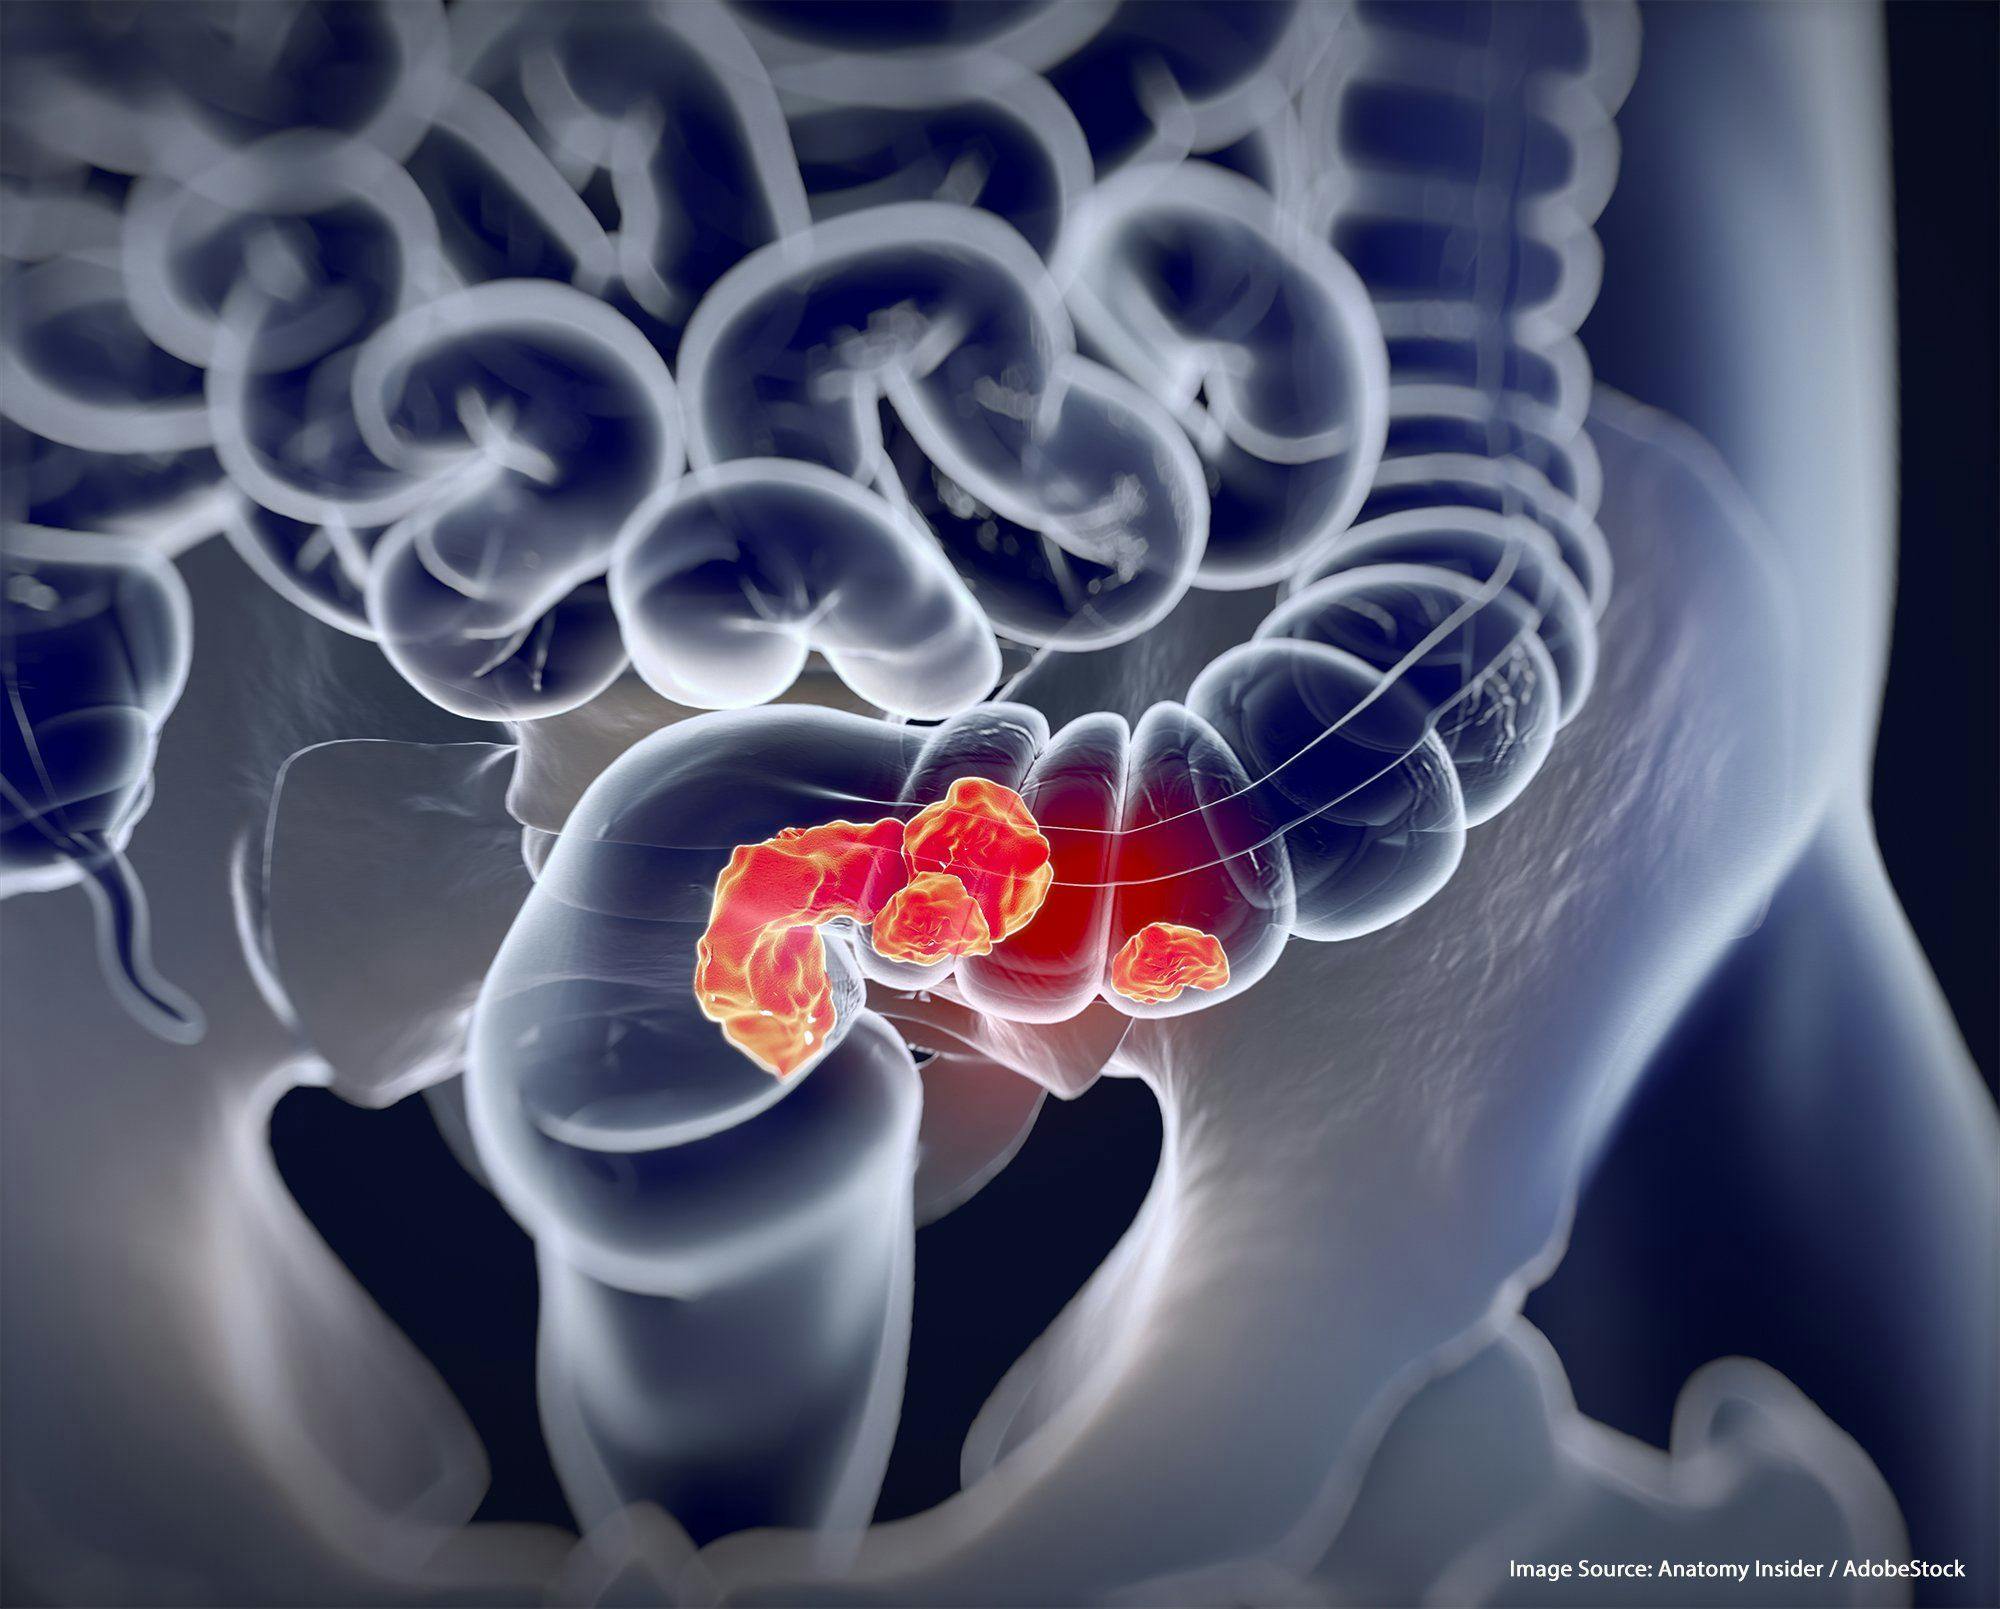 Nonoperative Management May Be Possible for Select Patients With Rectal Cancer